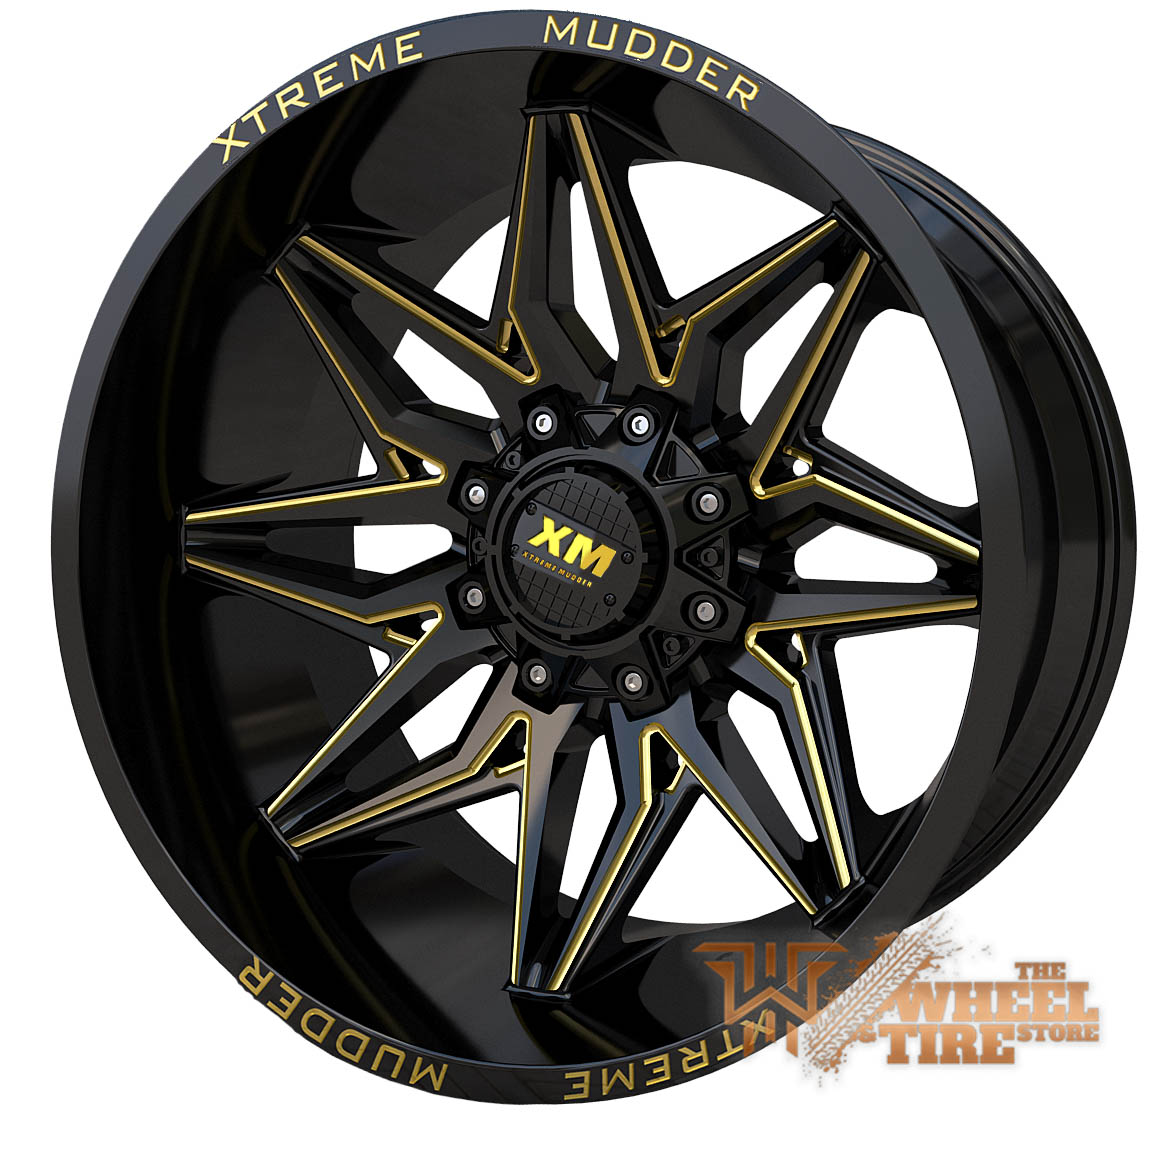 XTREME MUDDER XM-342 Wheel in Gloss Black Yellow Milled (Set of 4)